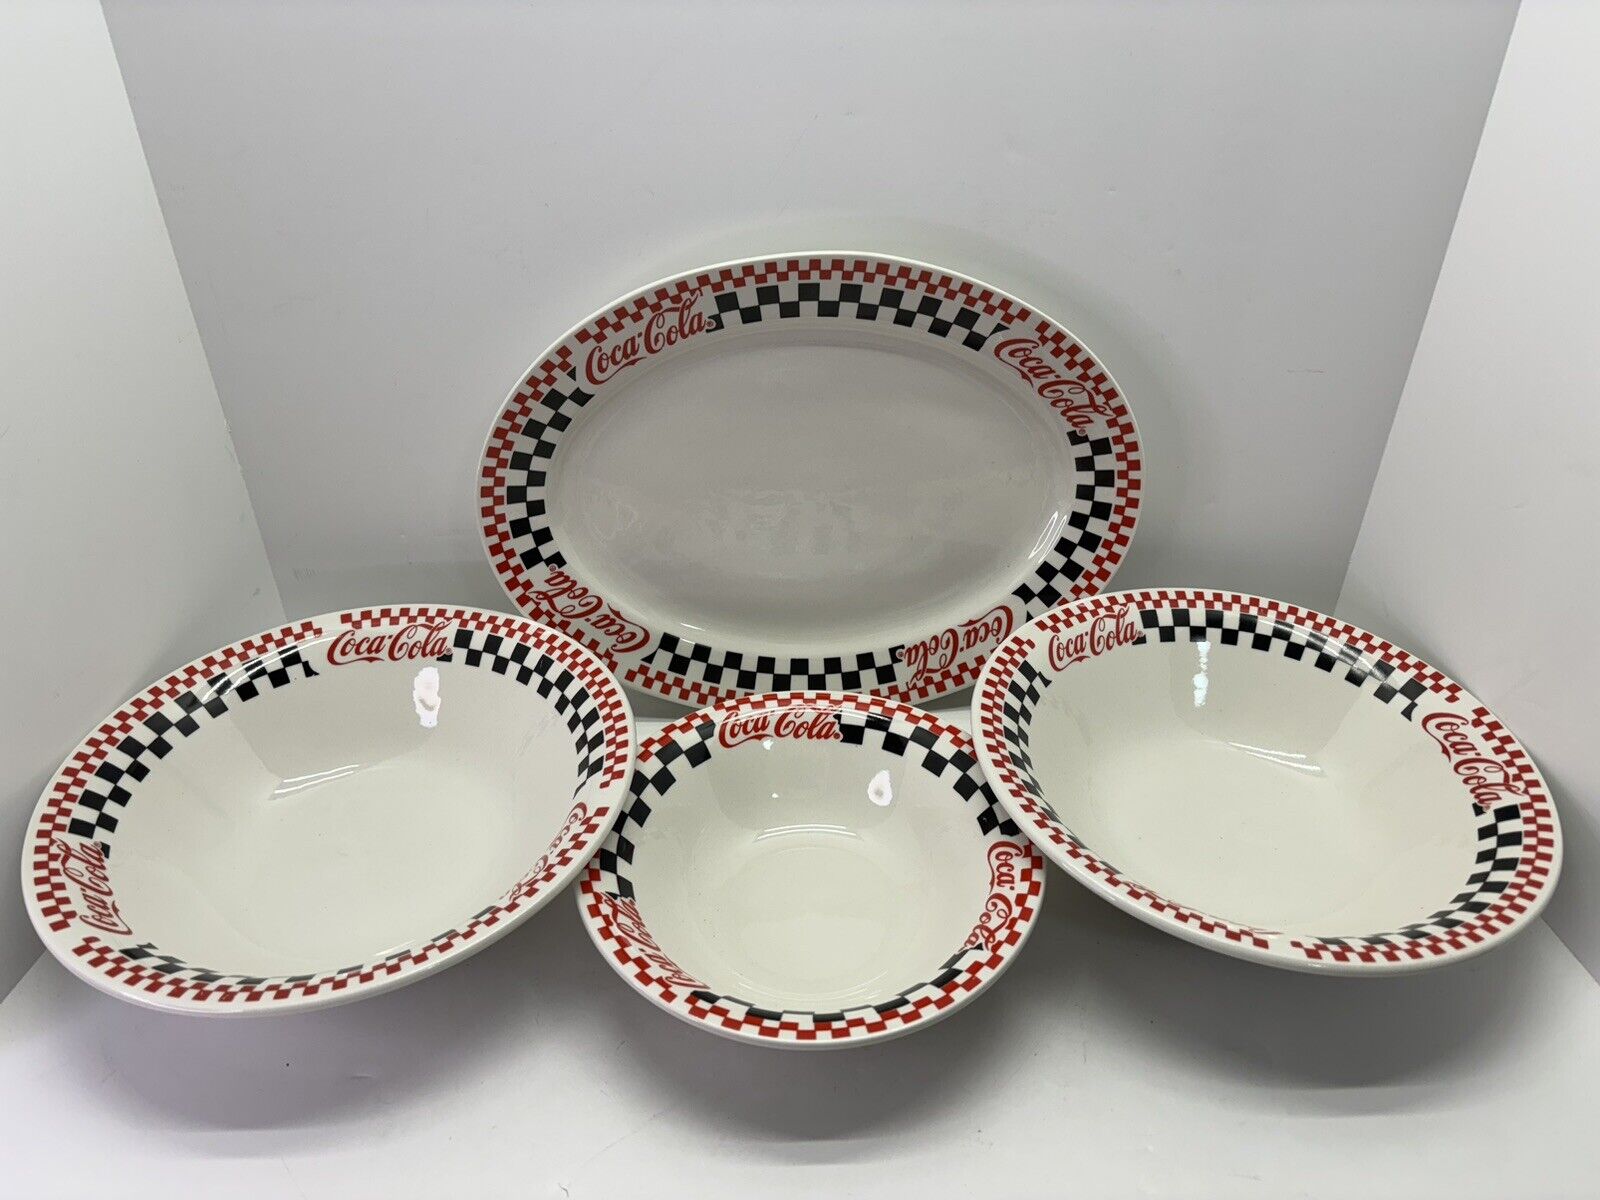 4 pc Coca-Cola Collectible Serving Set Gibson Checkered Pattern Platter & Bowls